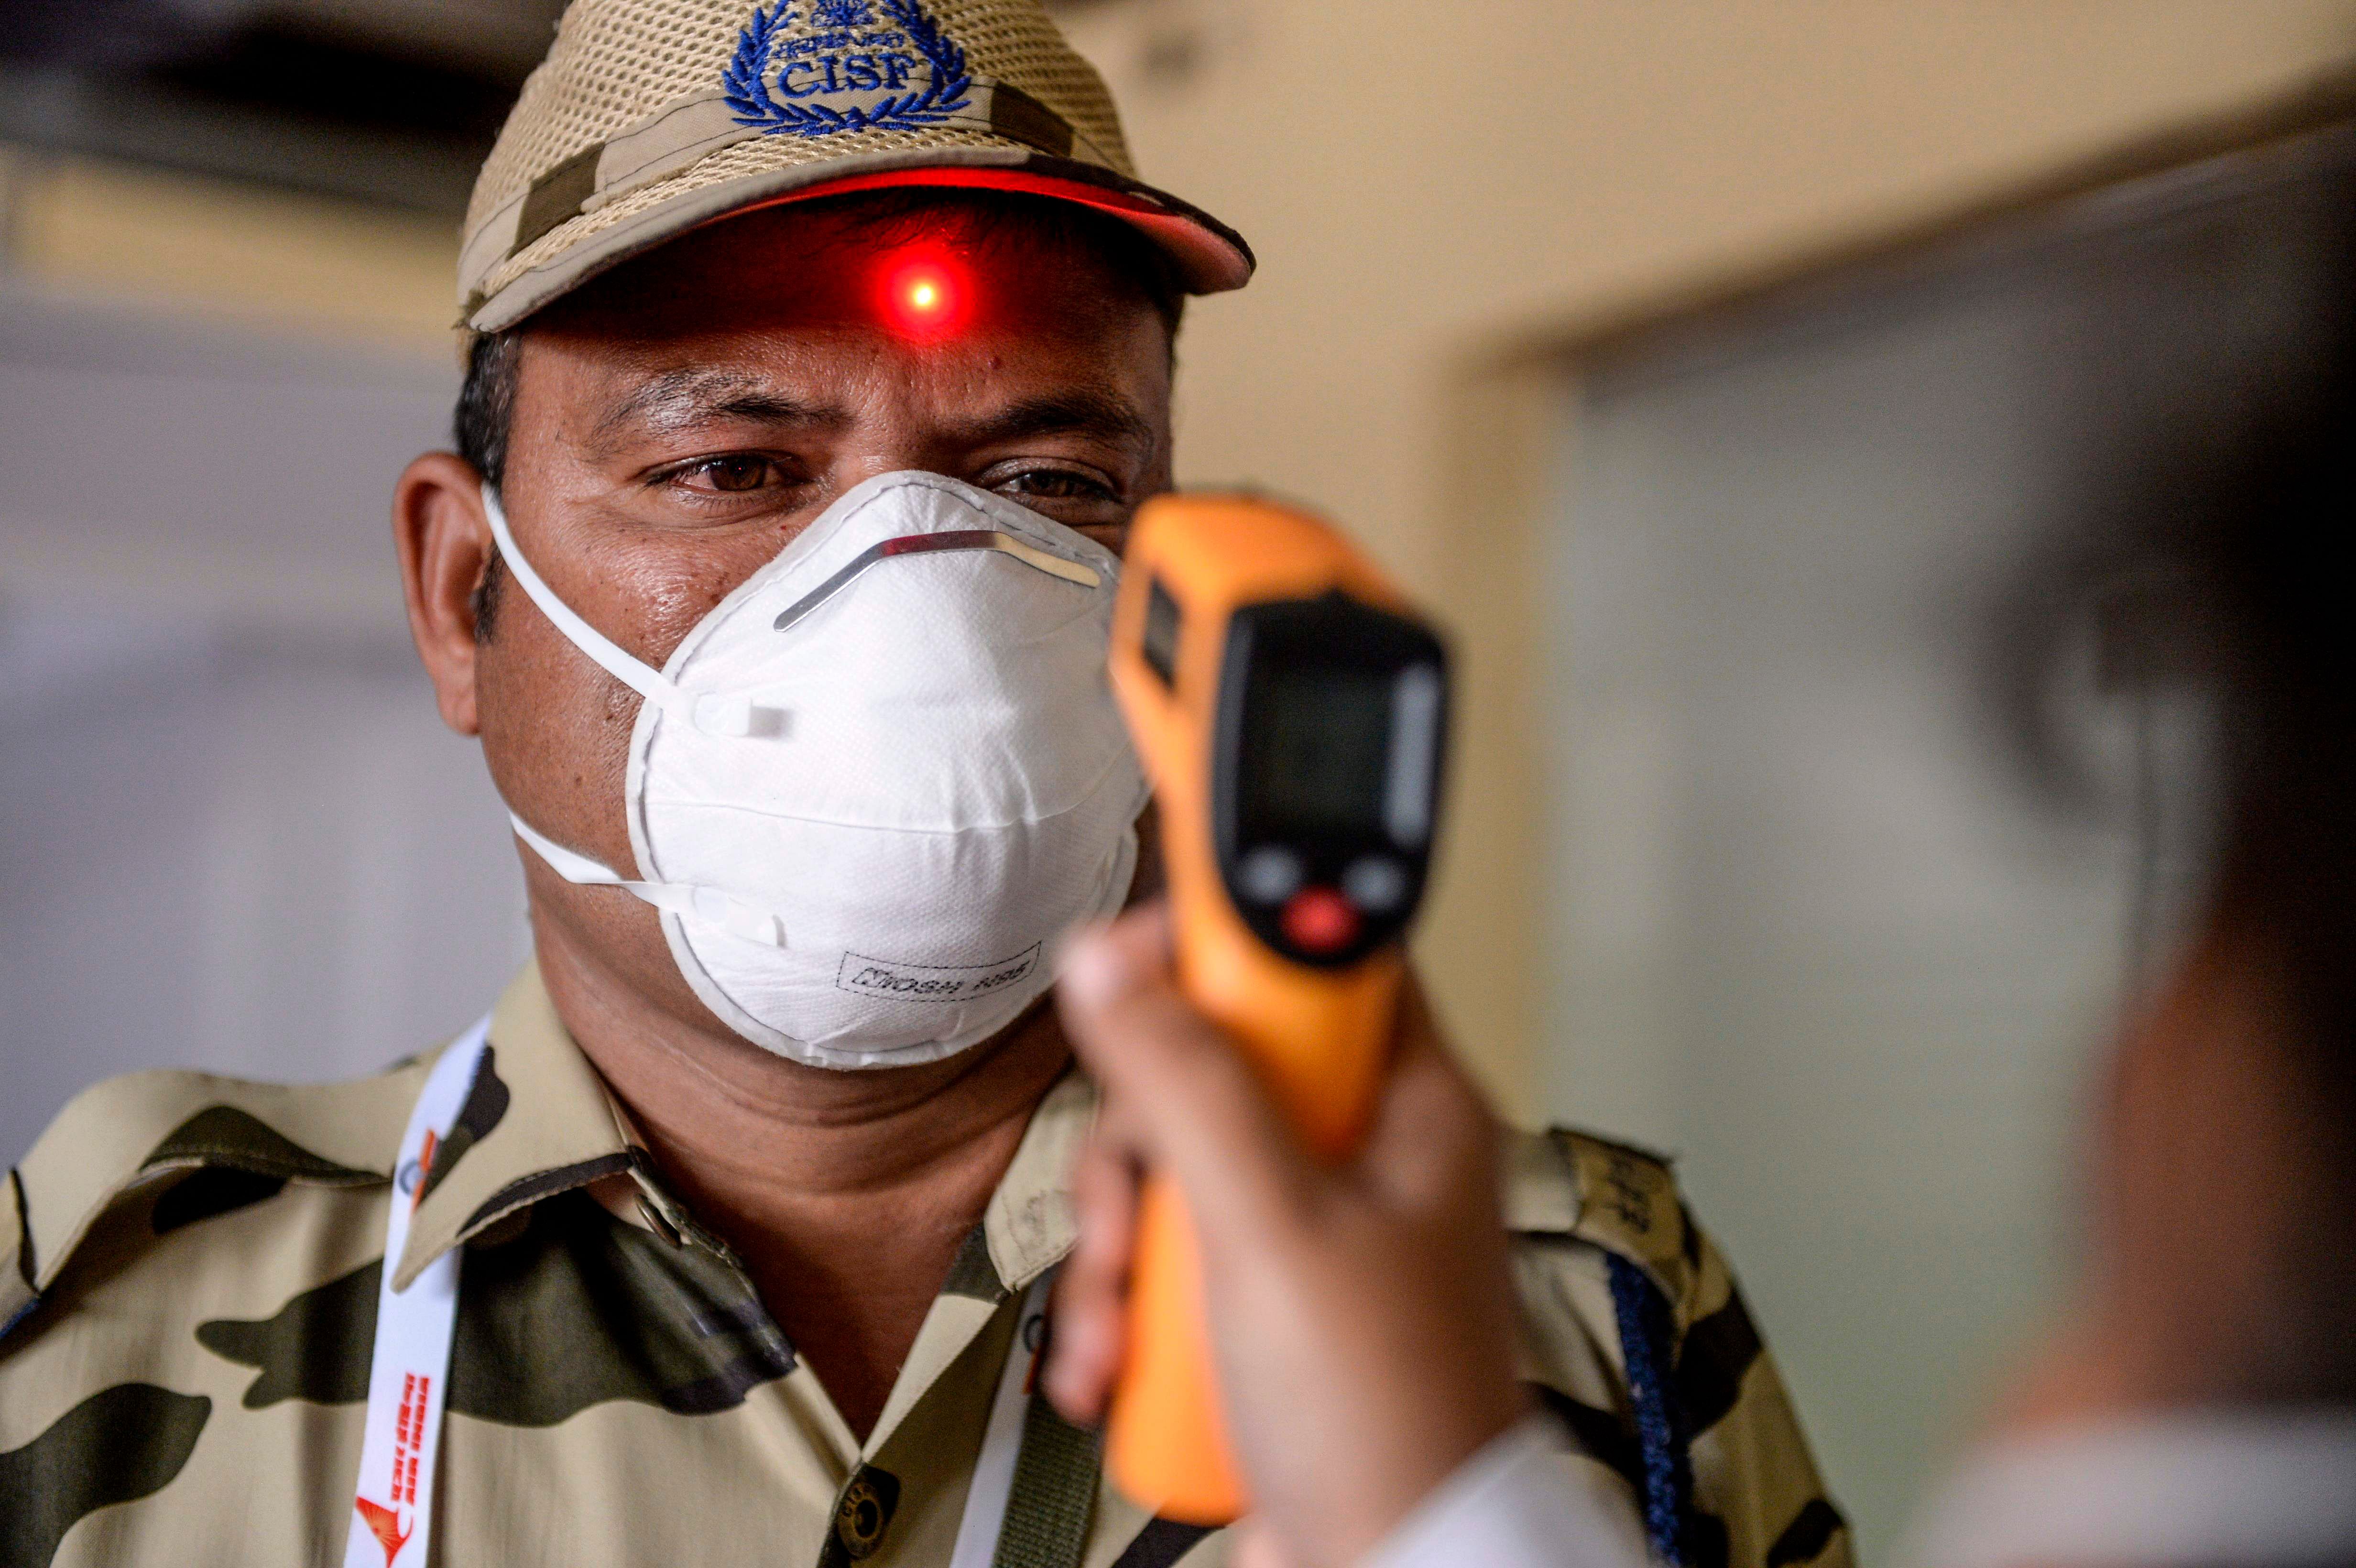 A health worker checks the temperature of a Central Industrial Security Force personnel amid concerns of the spread of the COVID-19 coronavirus. (Credit: AFP Photo)